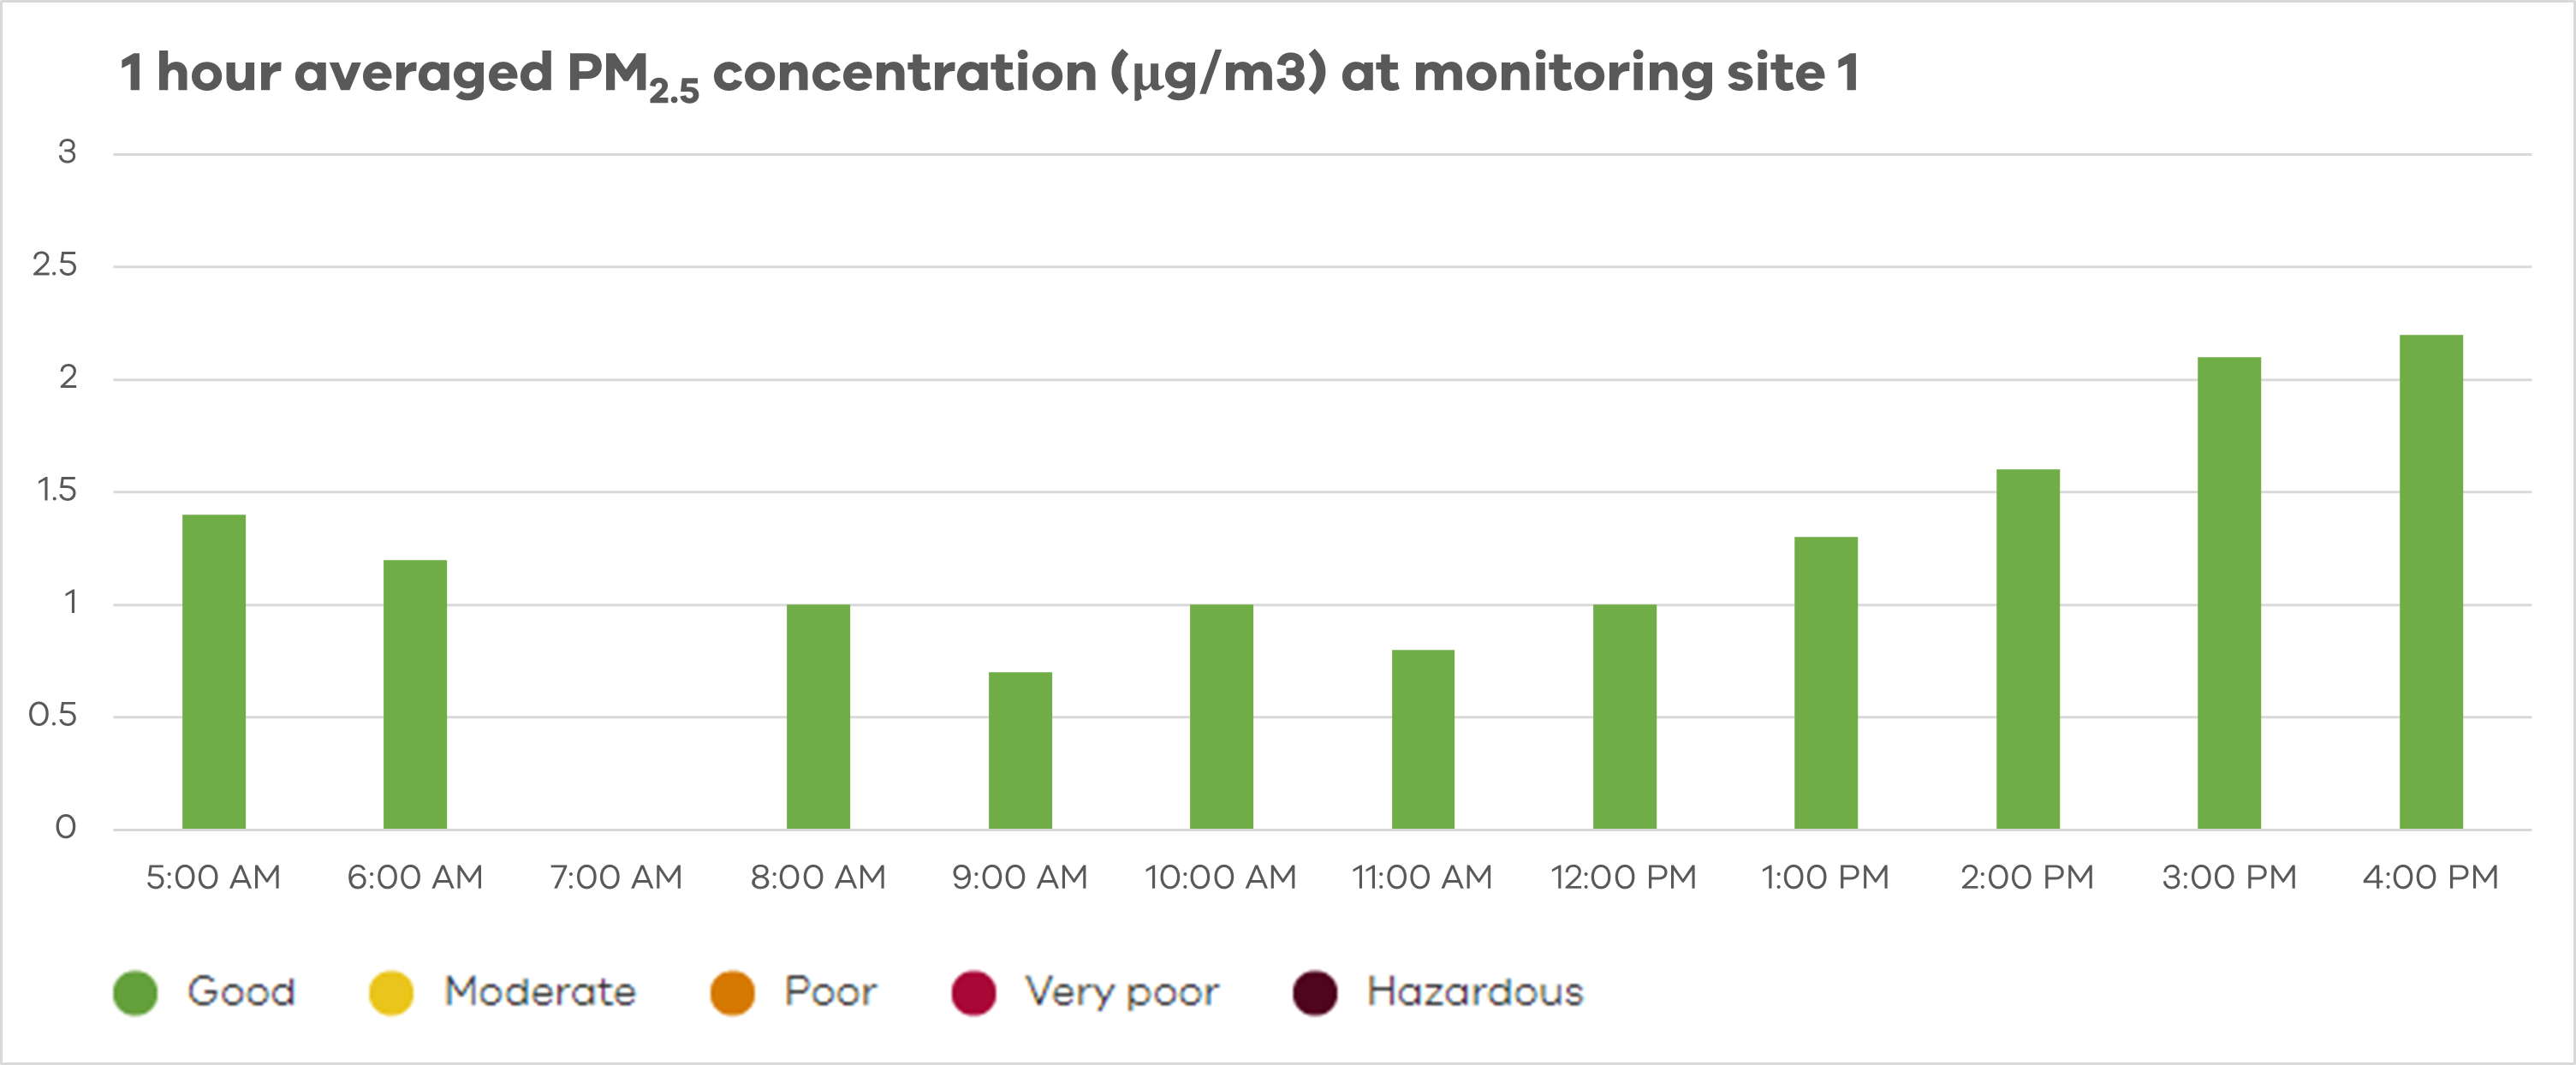 Laverton North recycling fire 1 hour averaged PM2.5 concentration at monitoring site 1